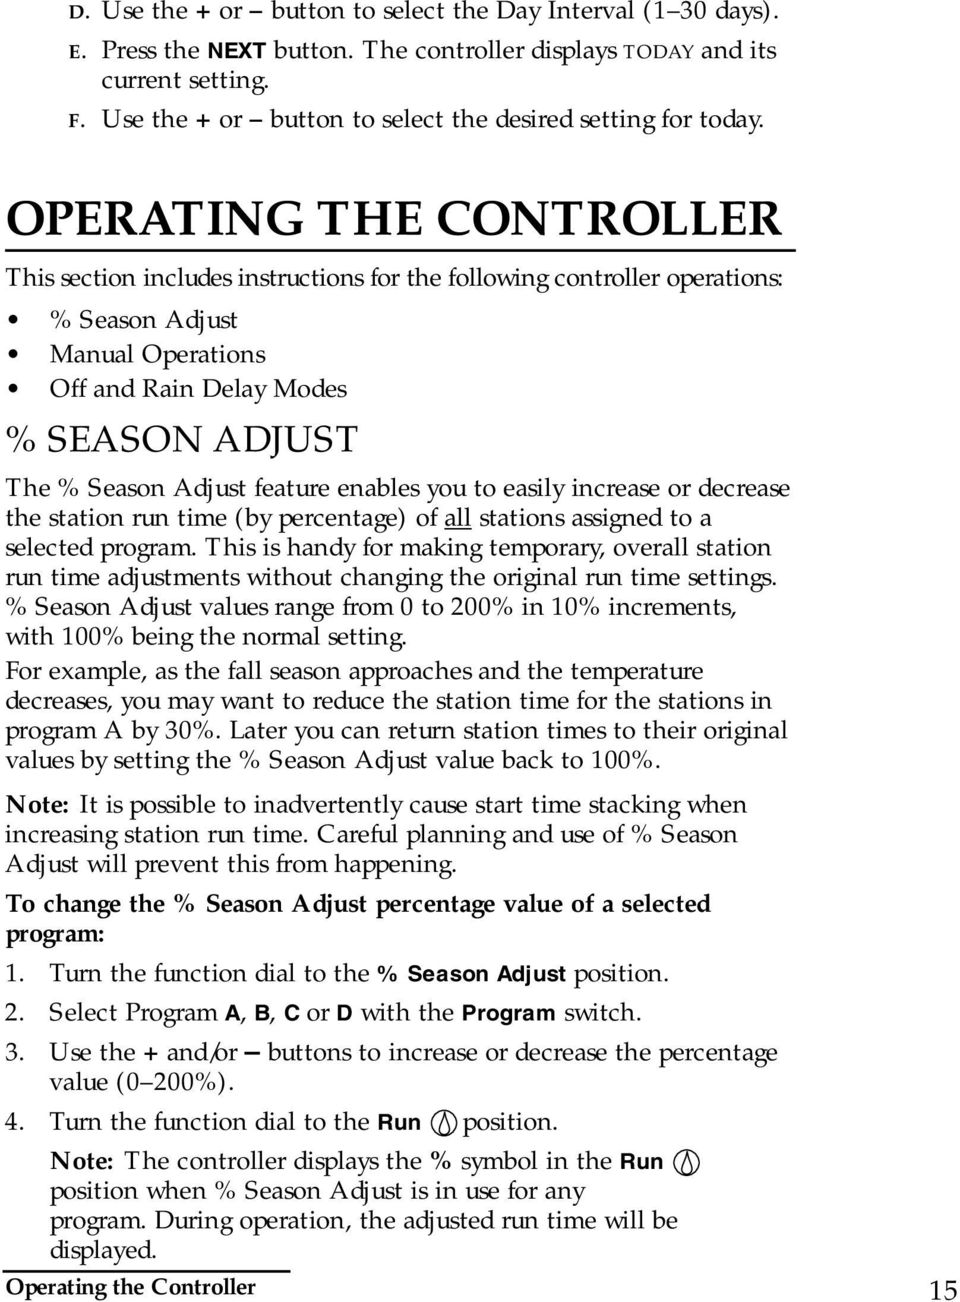 OPERATING THE CONTROLLER This section includes instructions for the following controller operations: % Season Adjust Manual Operations Off and Rain Delay Modes % SEASON ADJUST The % Season Adjust